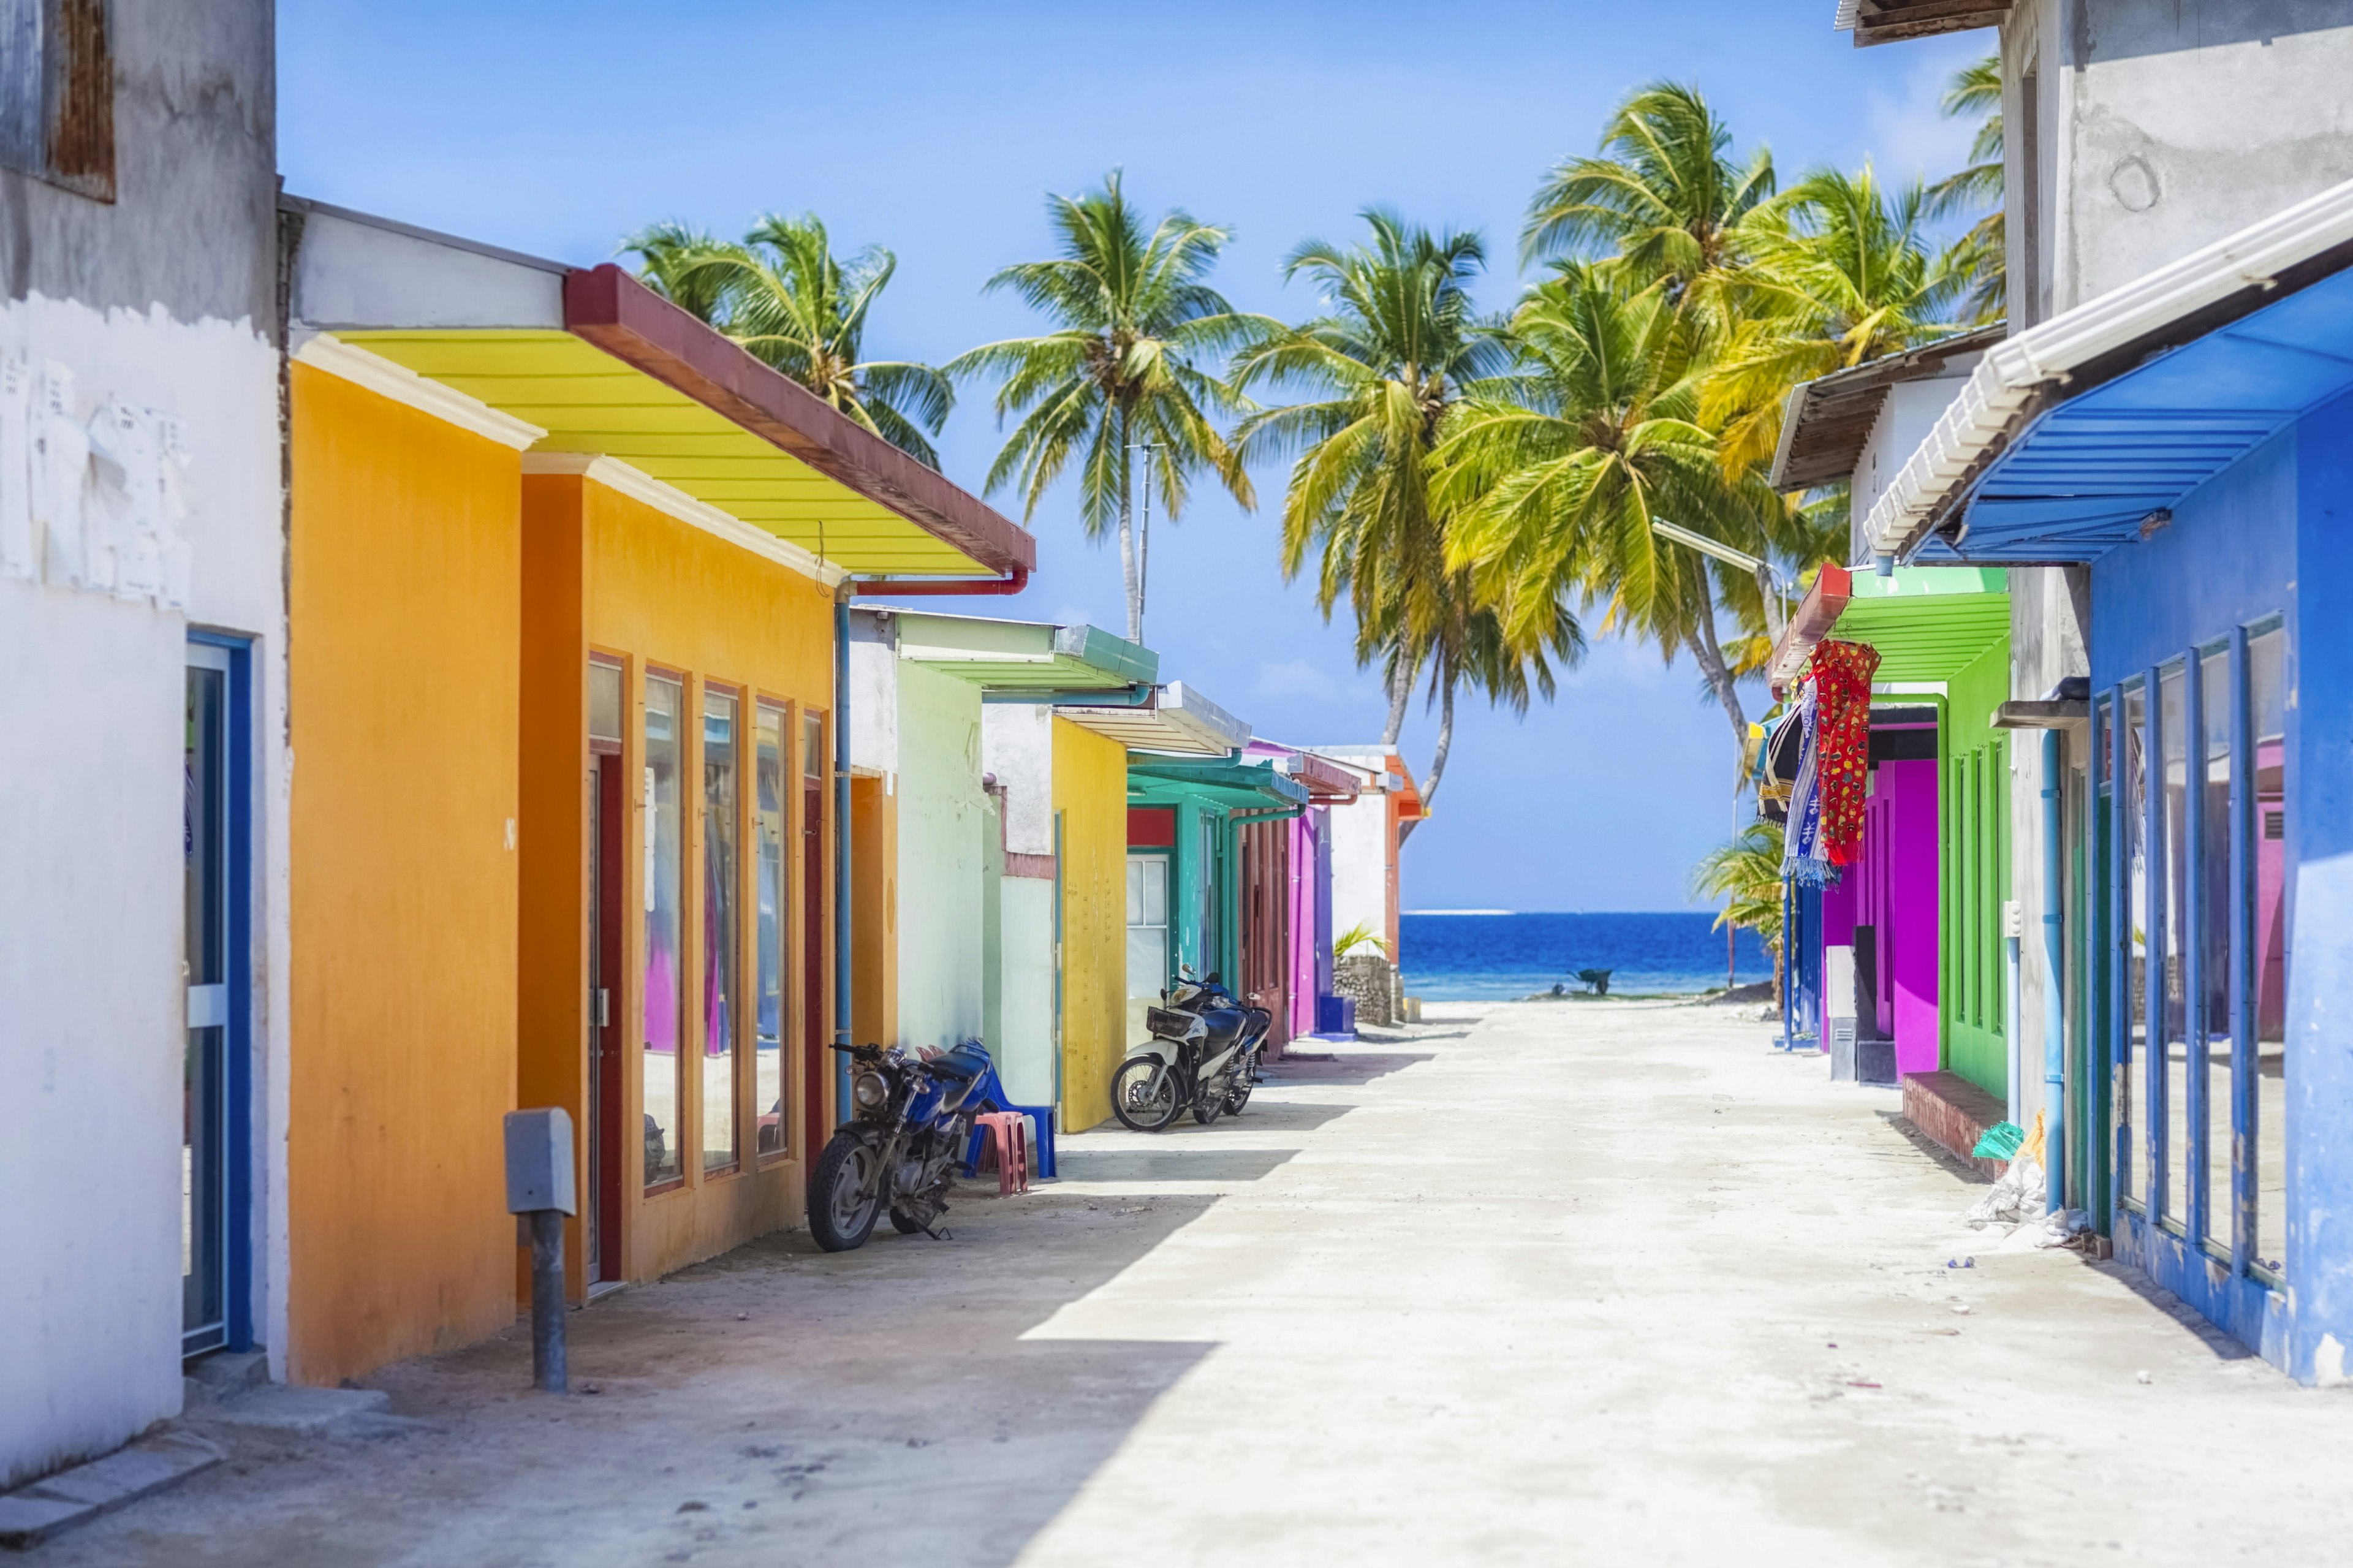 Shopping street with typically colourful house facades on Maafushi island in the Maldives.